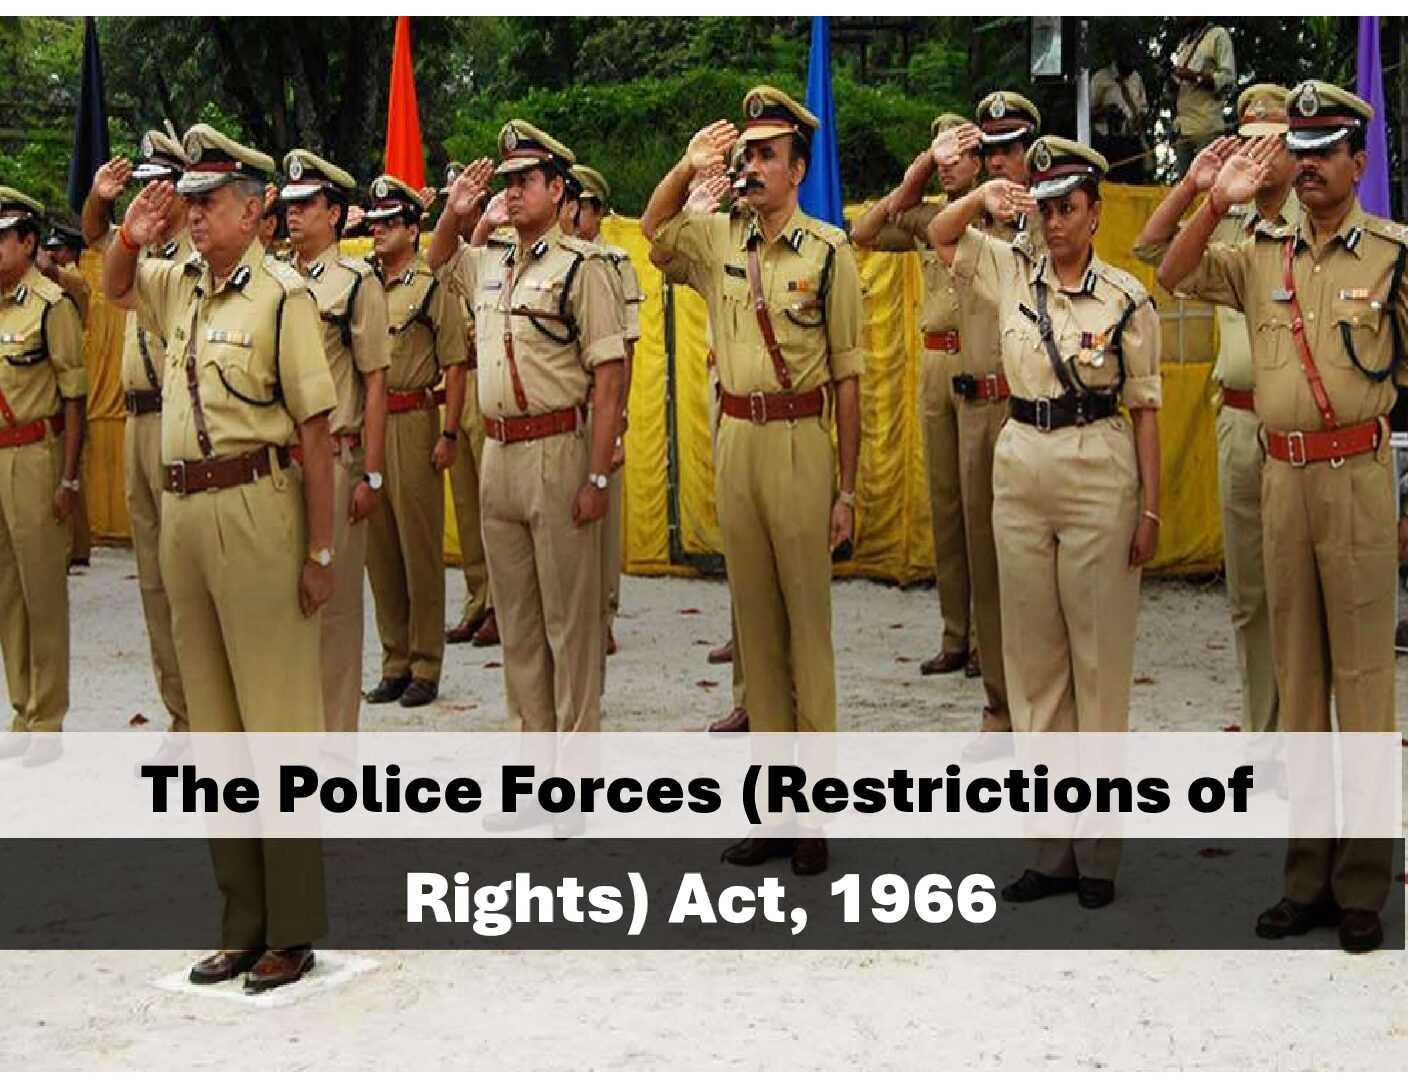 The Police Forces (Restrictions of Rights) Act, 1986